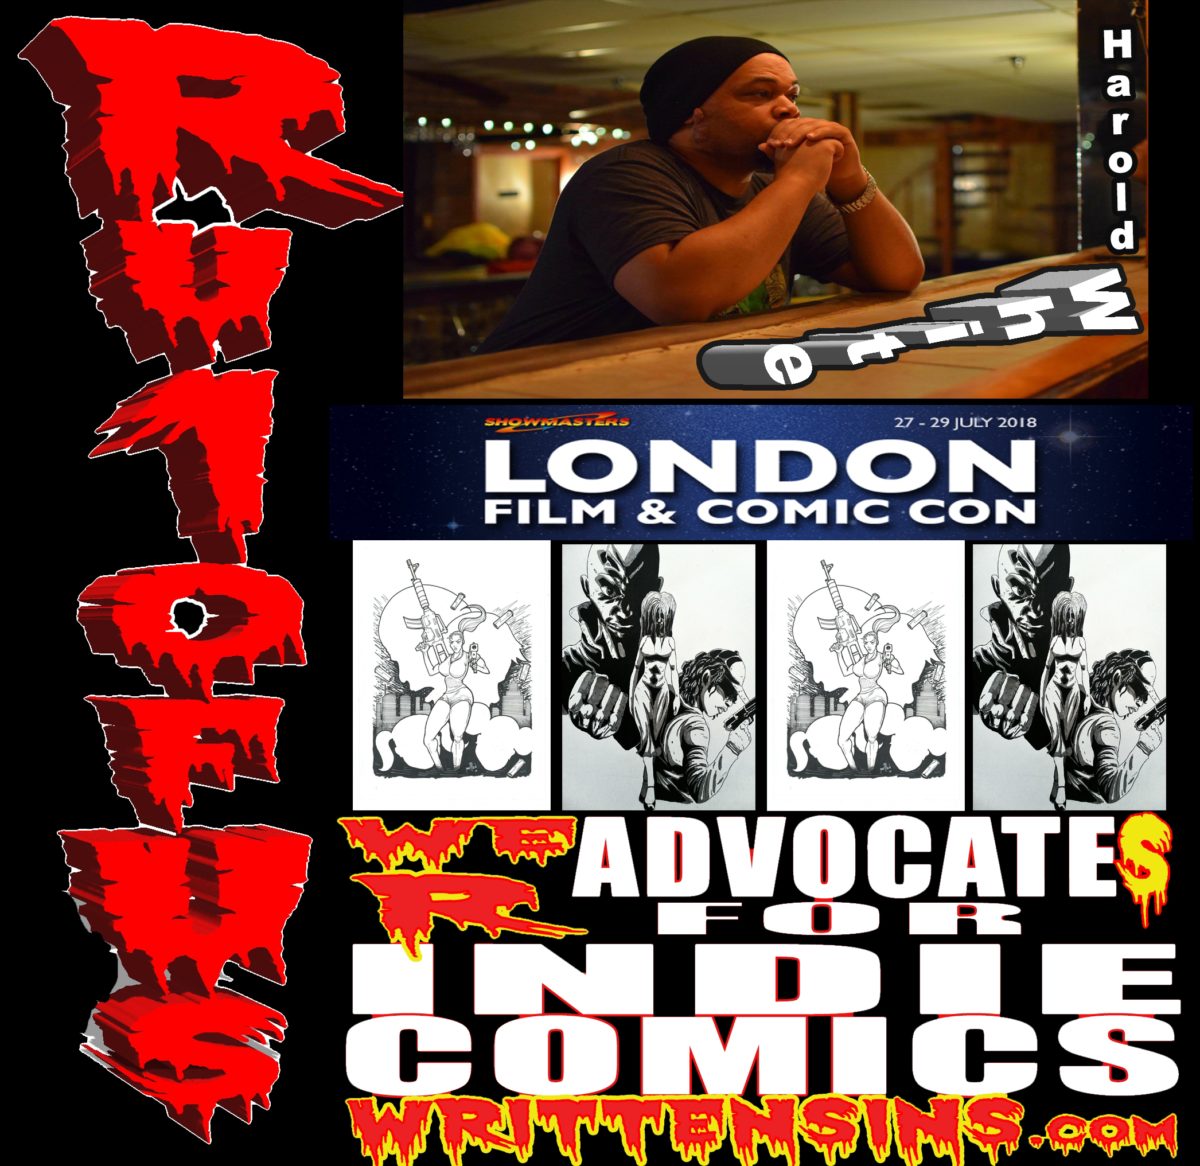 COMIC CON HIGHWAY INTERNATIONAL EXITS:: LONDON gets invaded by HAROLD WHITE at the  London Film and Comic Con  . July 27-29 2018